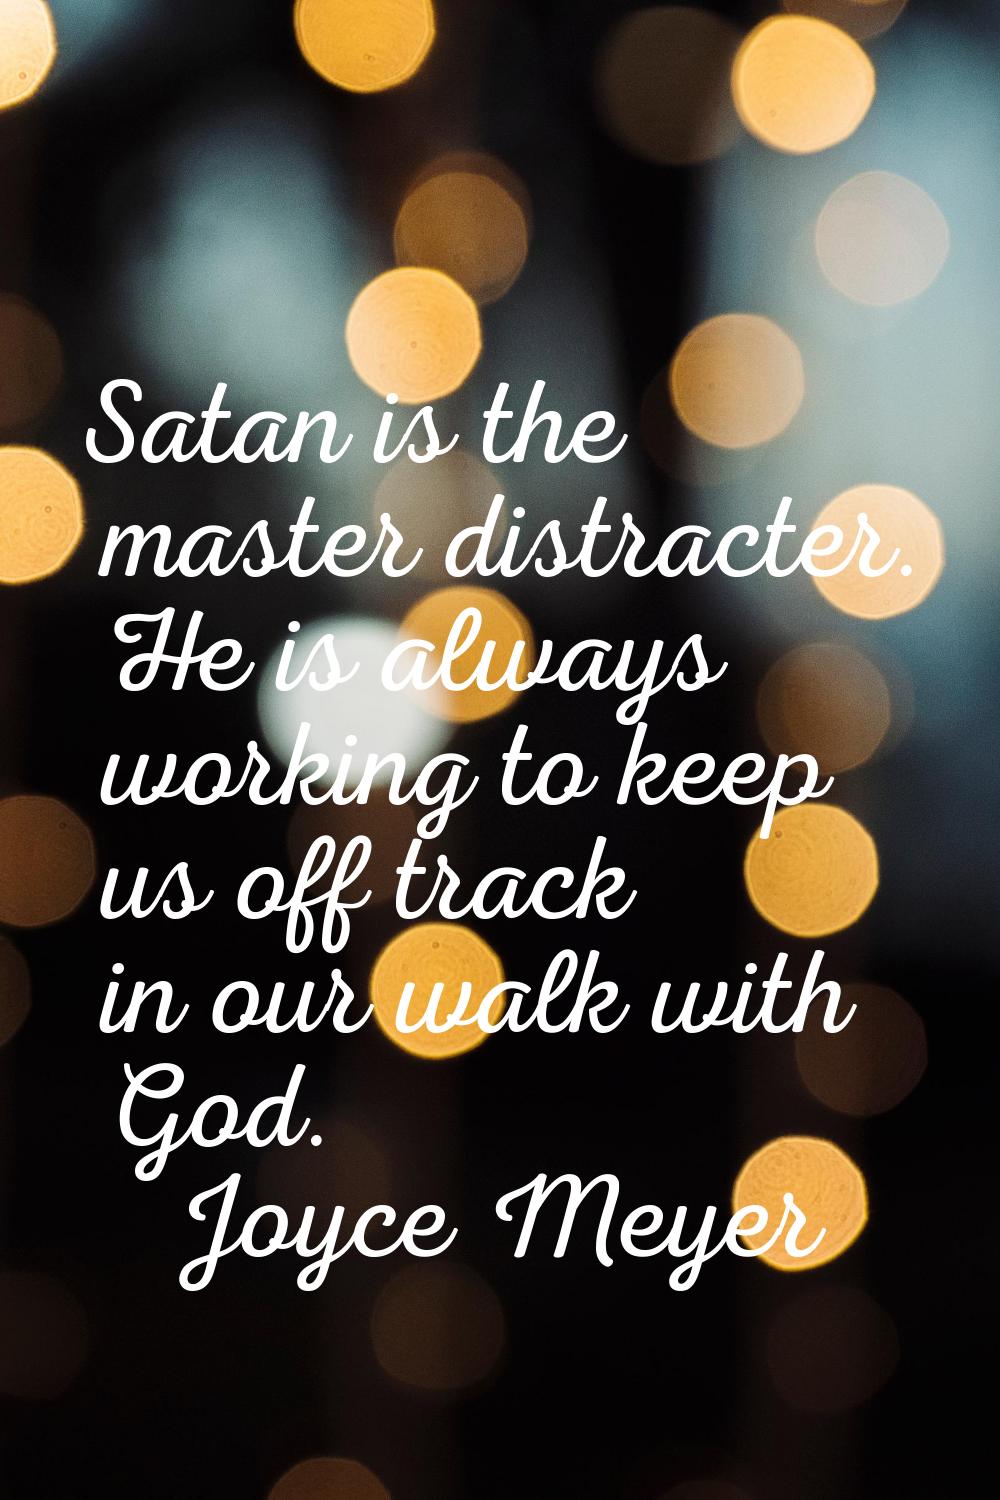 Satan is the master distracter. He is always working to keep us off track in our walk with God.